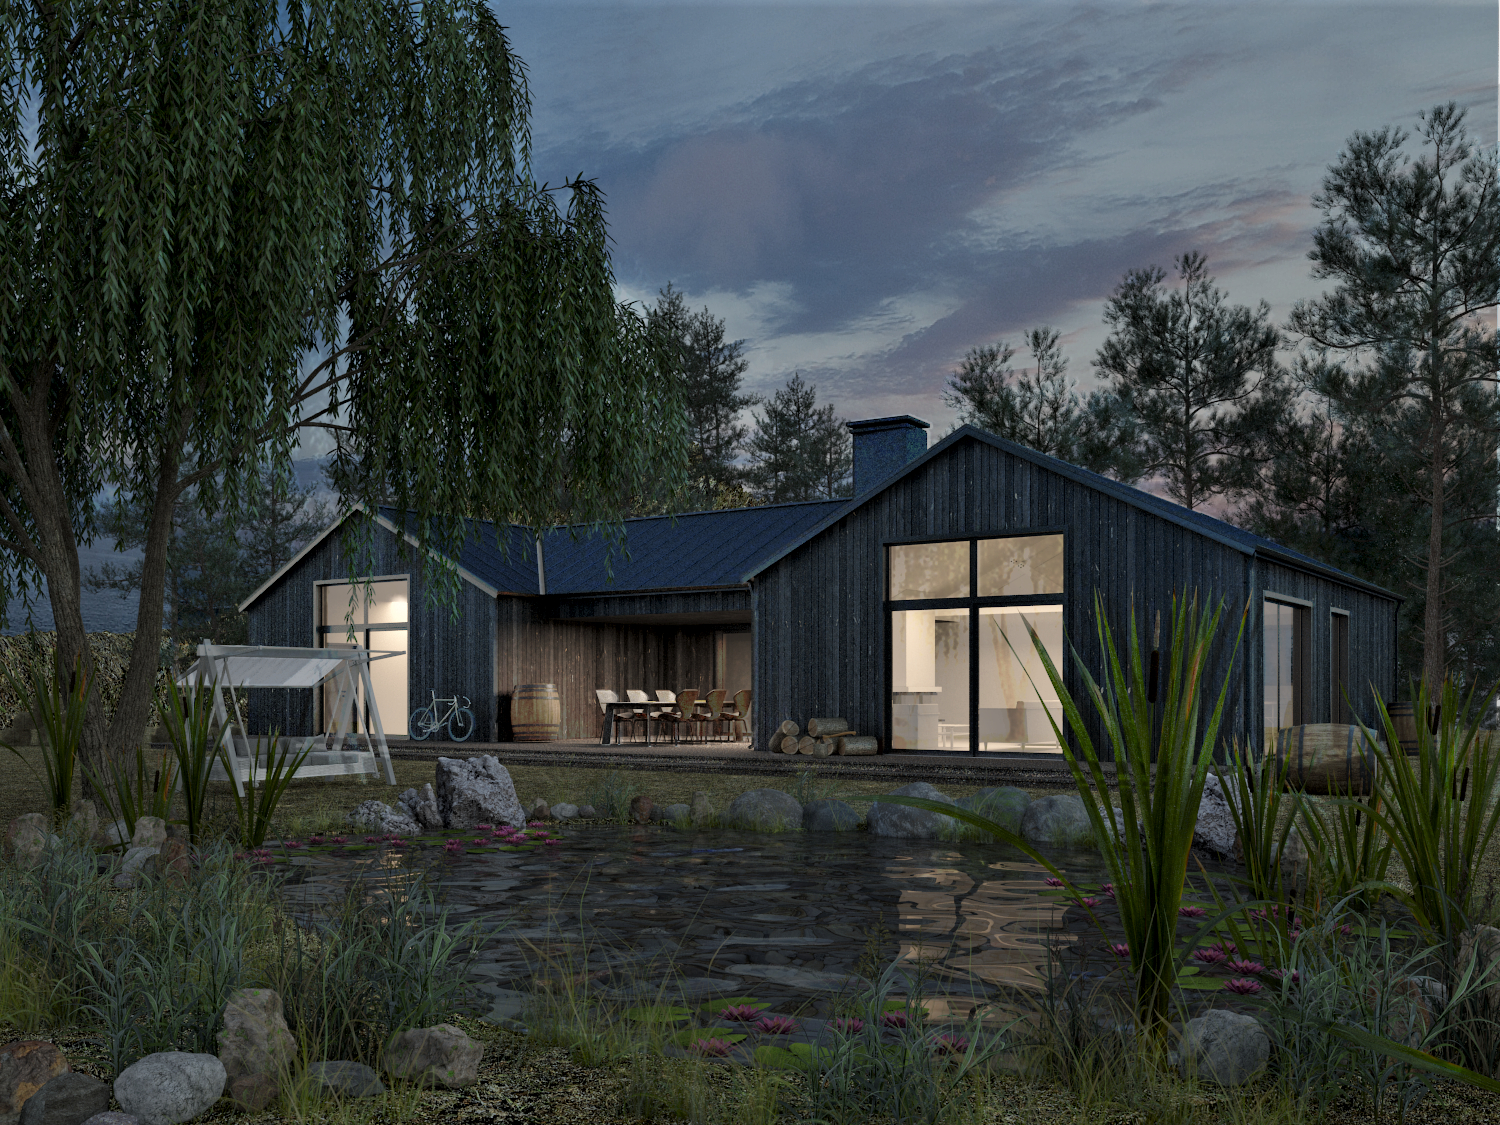 Camping in 3d max vray 3.0 image